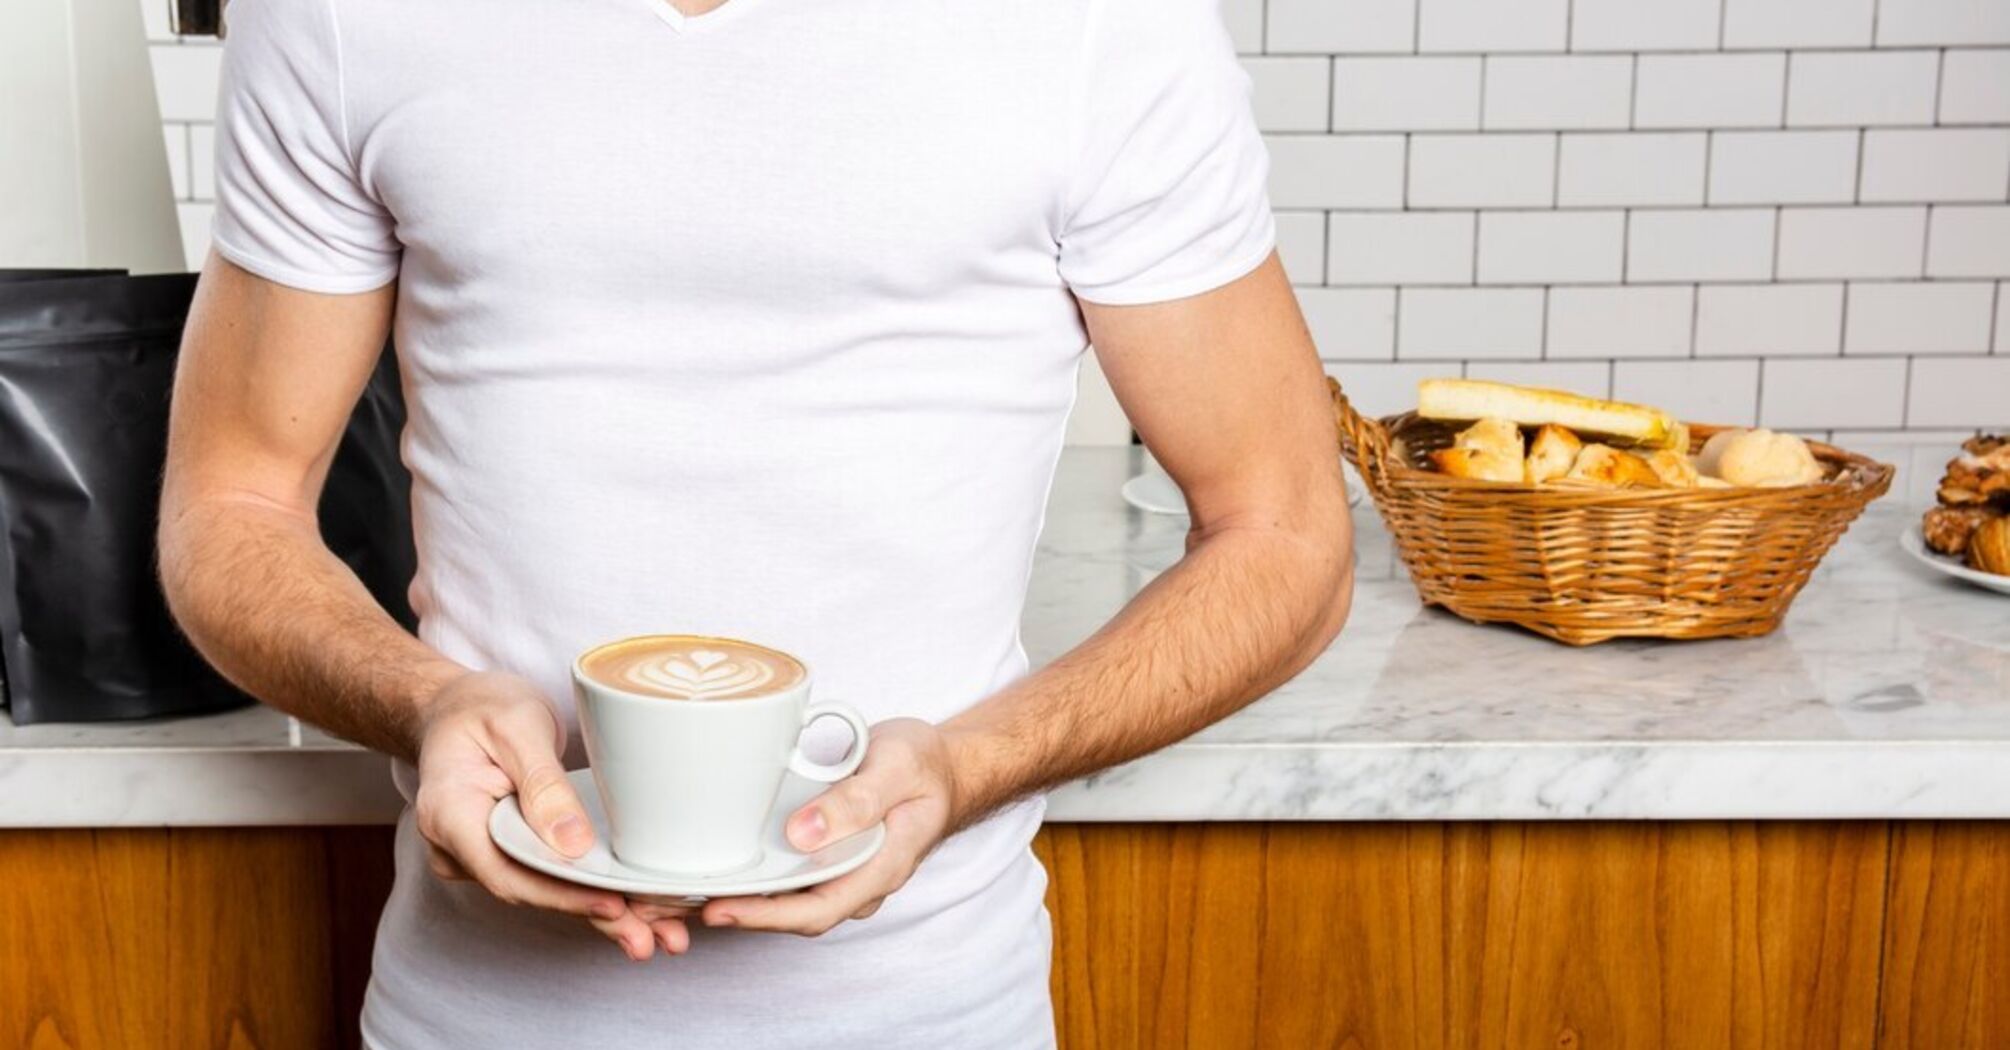 How to wash a coffee stain from a white fabric: Three natural remedies